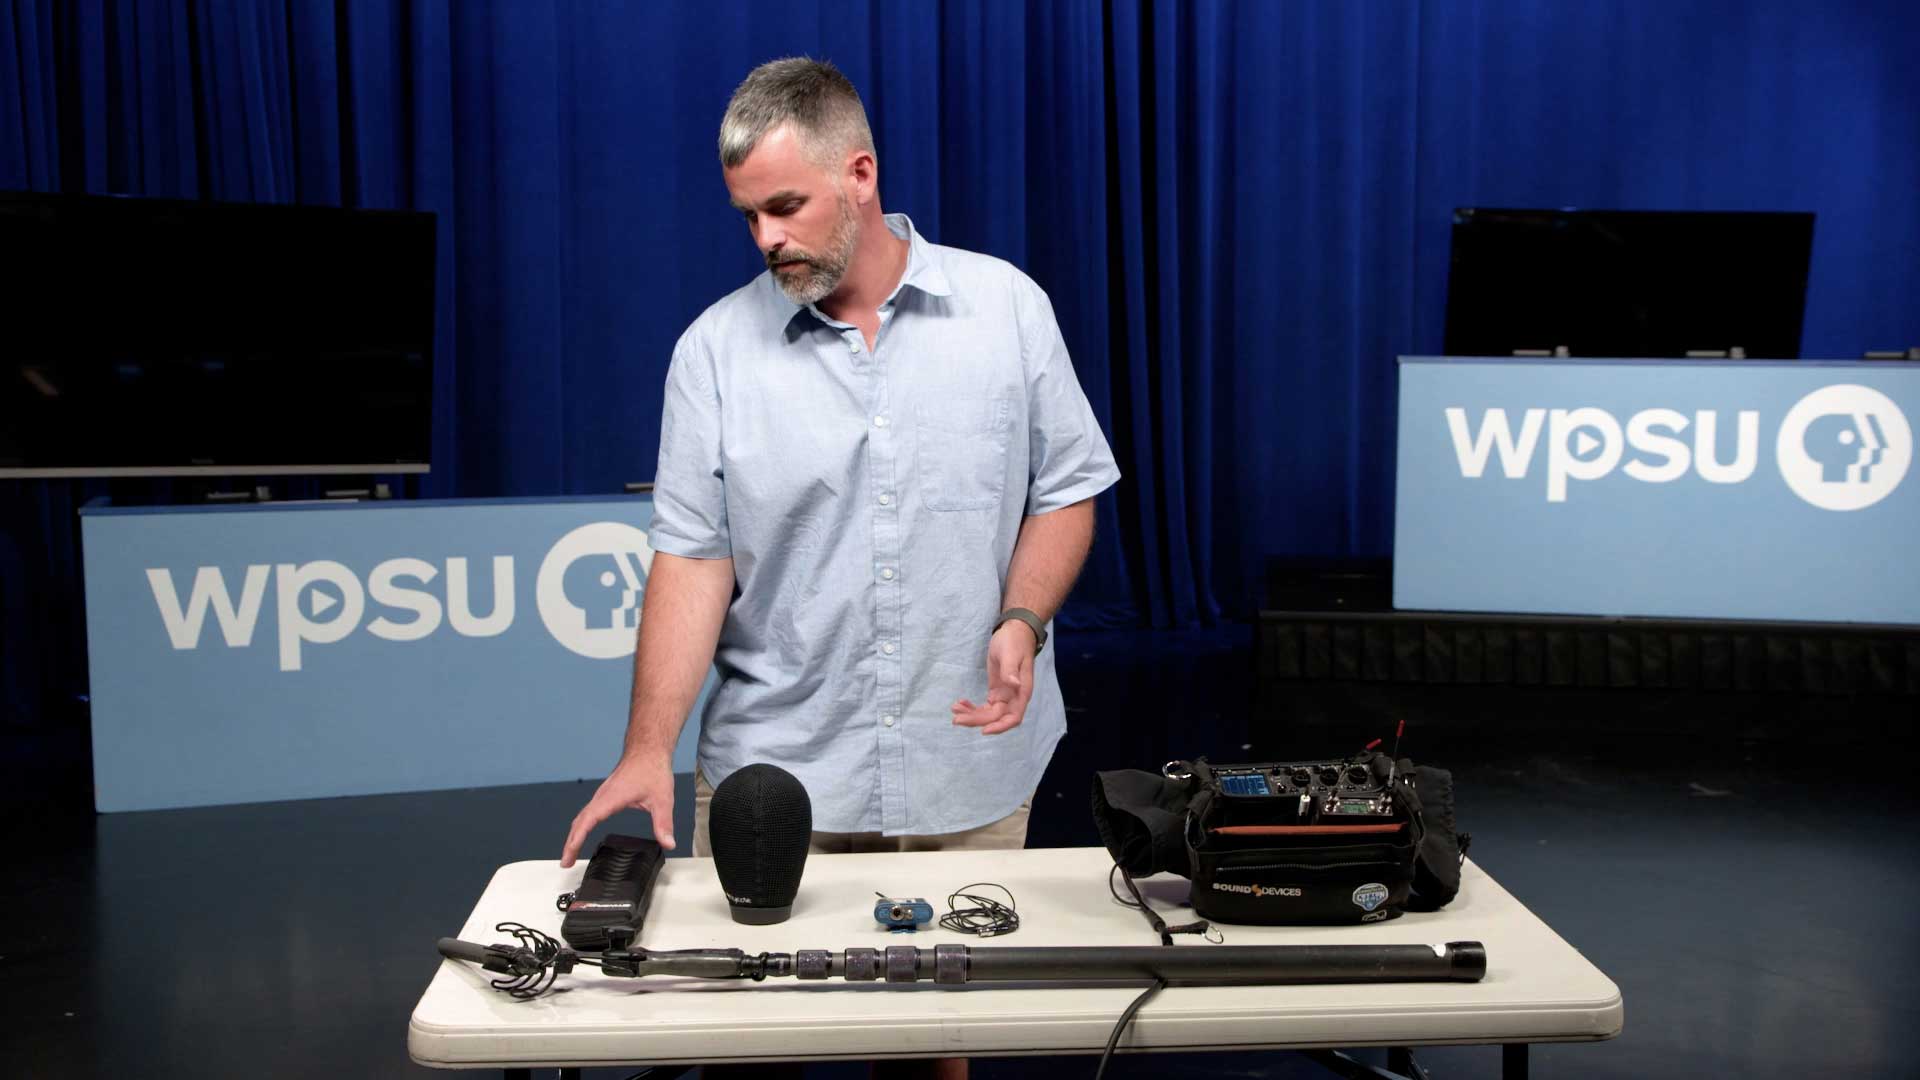 WPSU producer showing various pieces of audio equipment